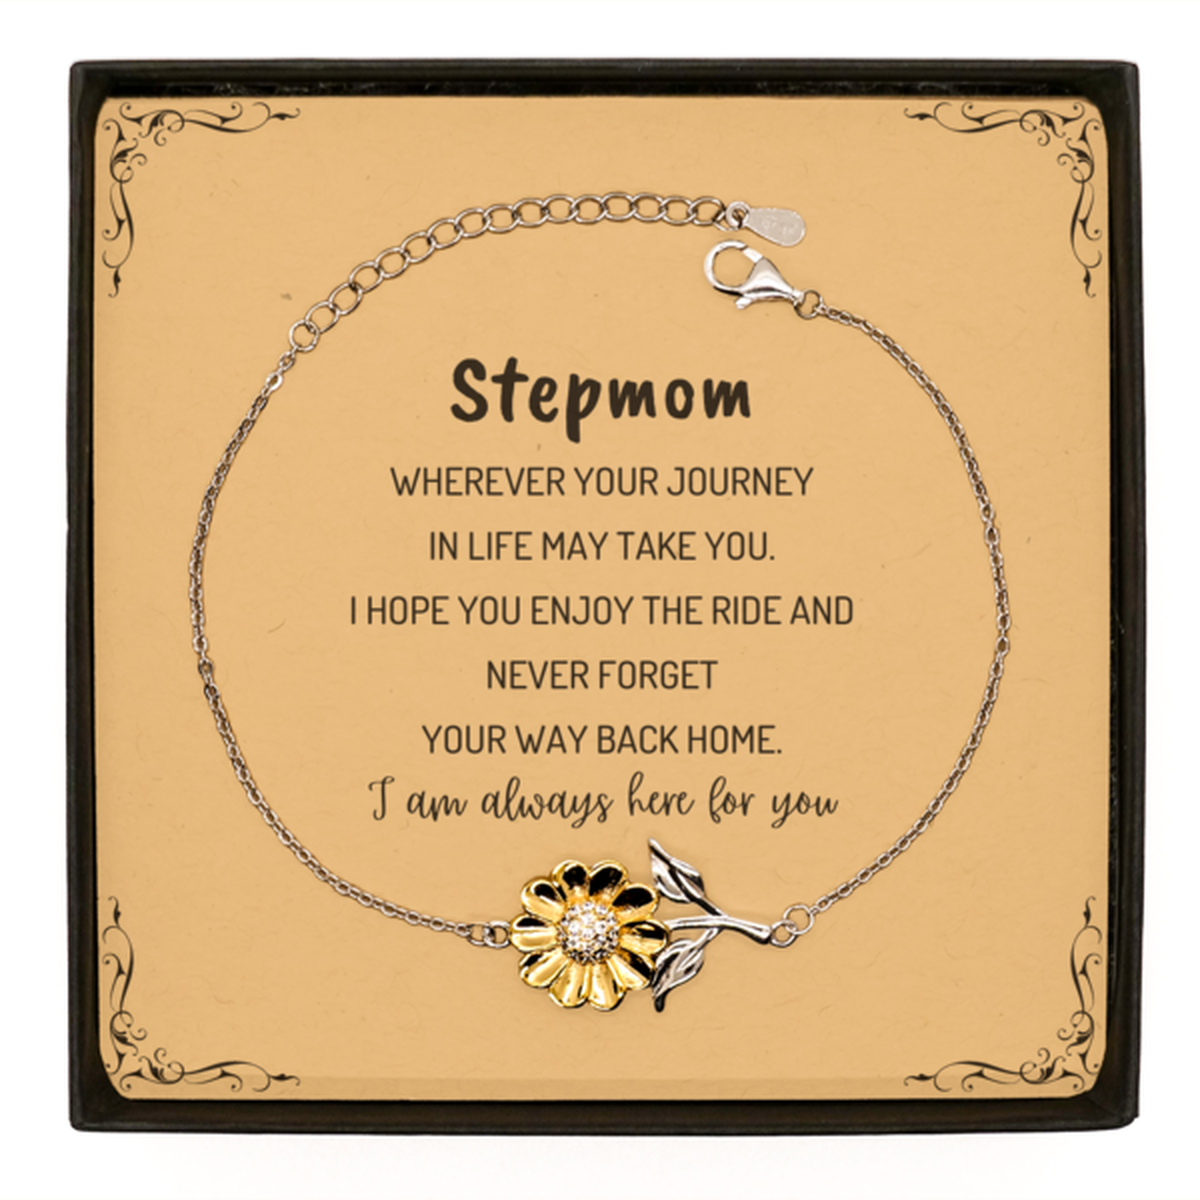 Stepmom wherever your journey in life may take you, I am always here for you Stepmom Sunflower Bracelet, Awesome Christmas Gifts For Stepmom Message Card, Stepmom Birthday Gifts for Men Women Family Loved One